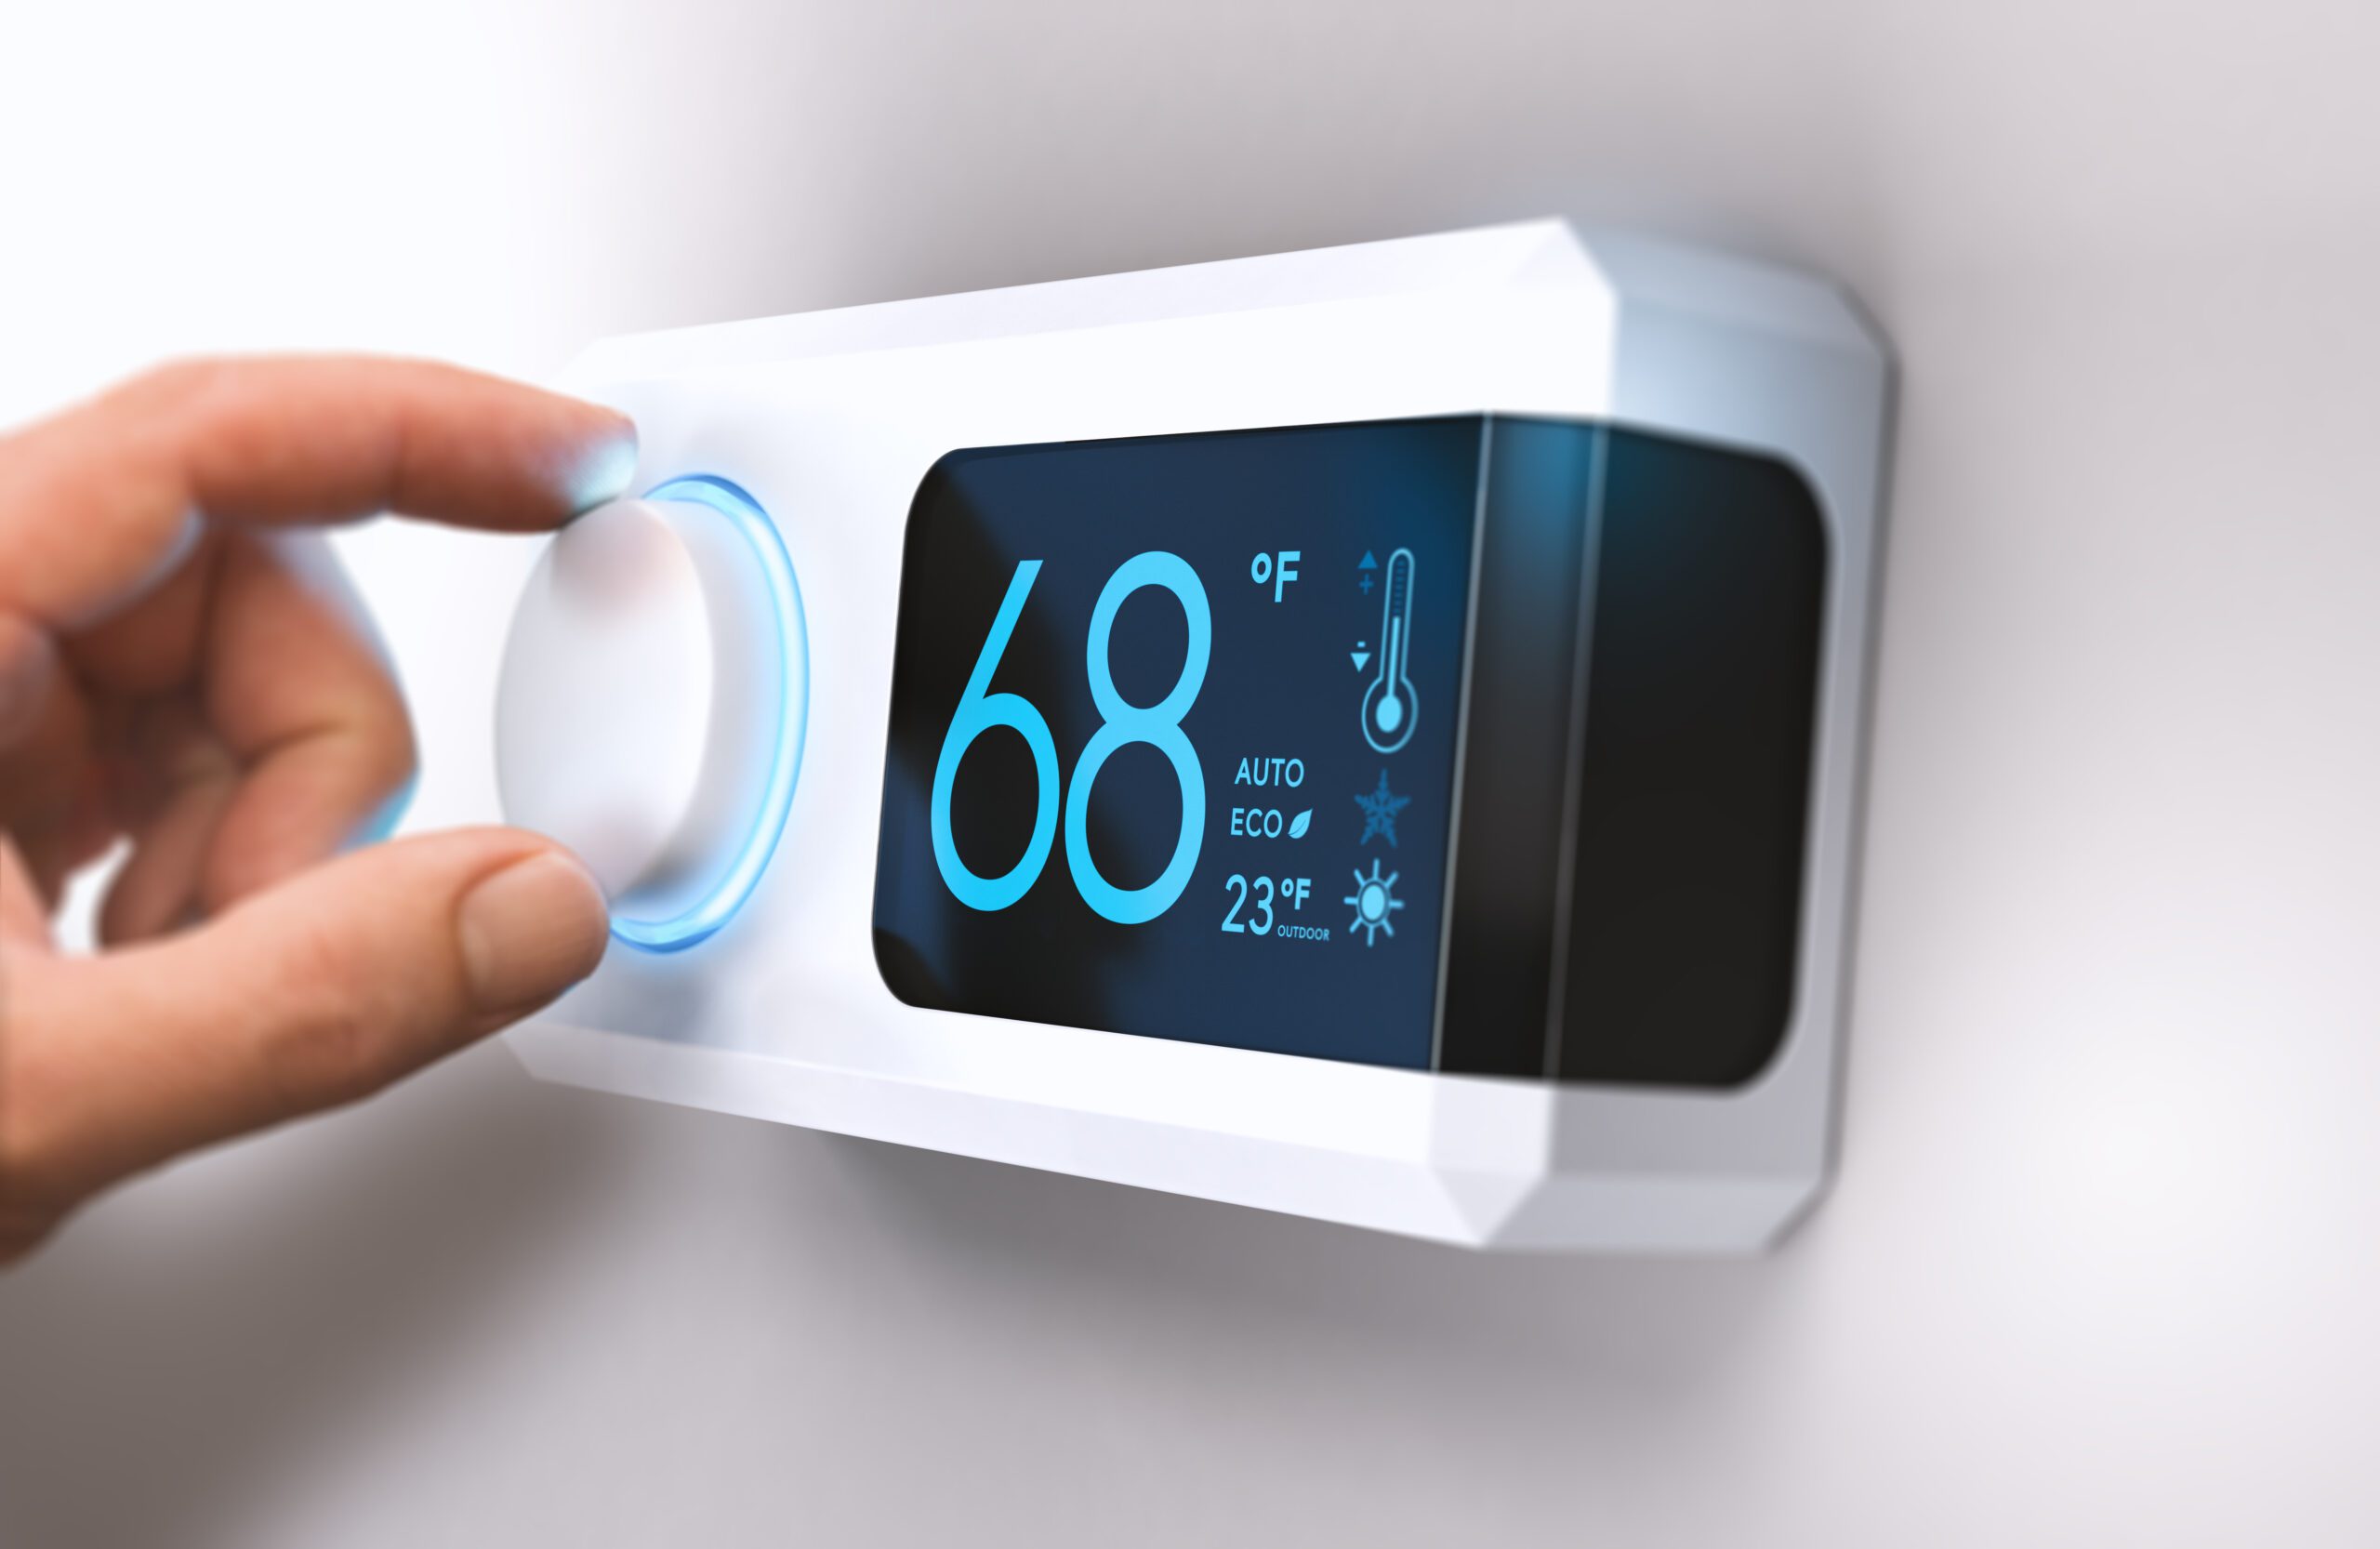 The Ultimate Guide to Smart Thermostats